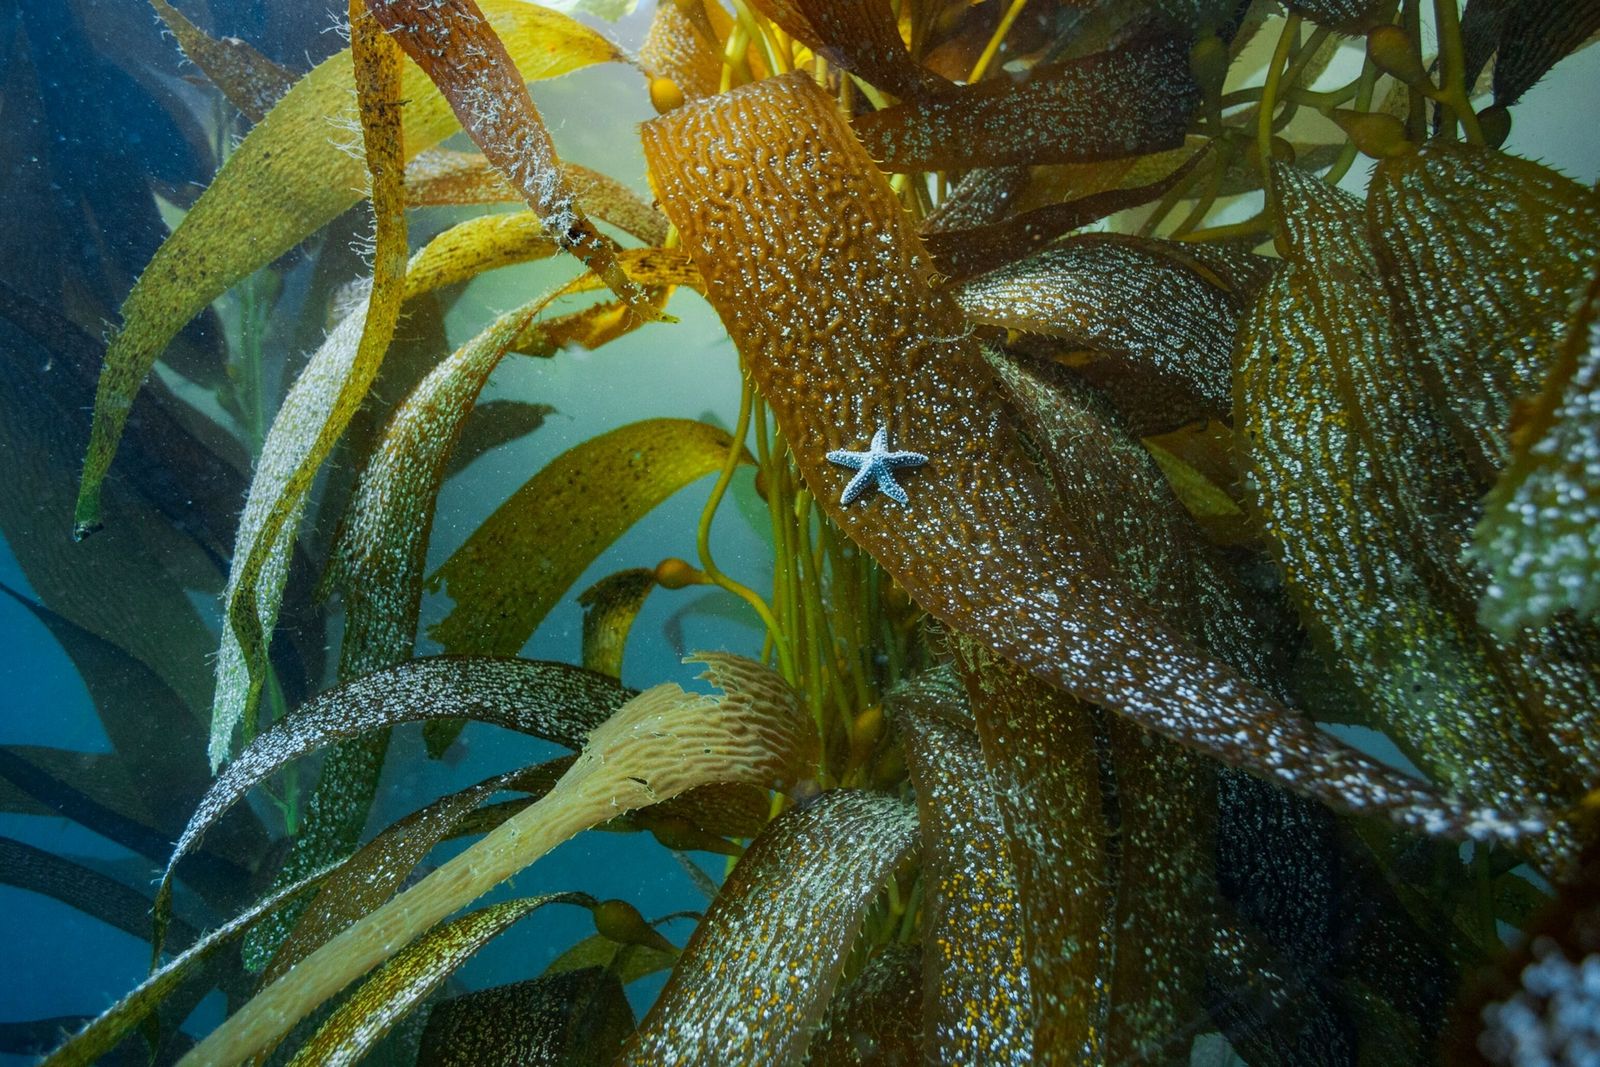 The disappearance of starfish in North America threatens the entire marine ecosystem

